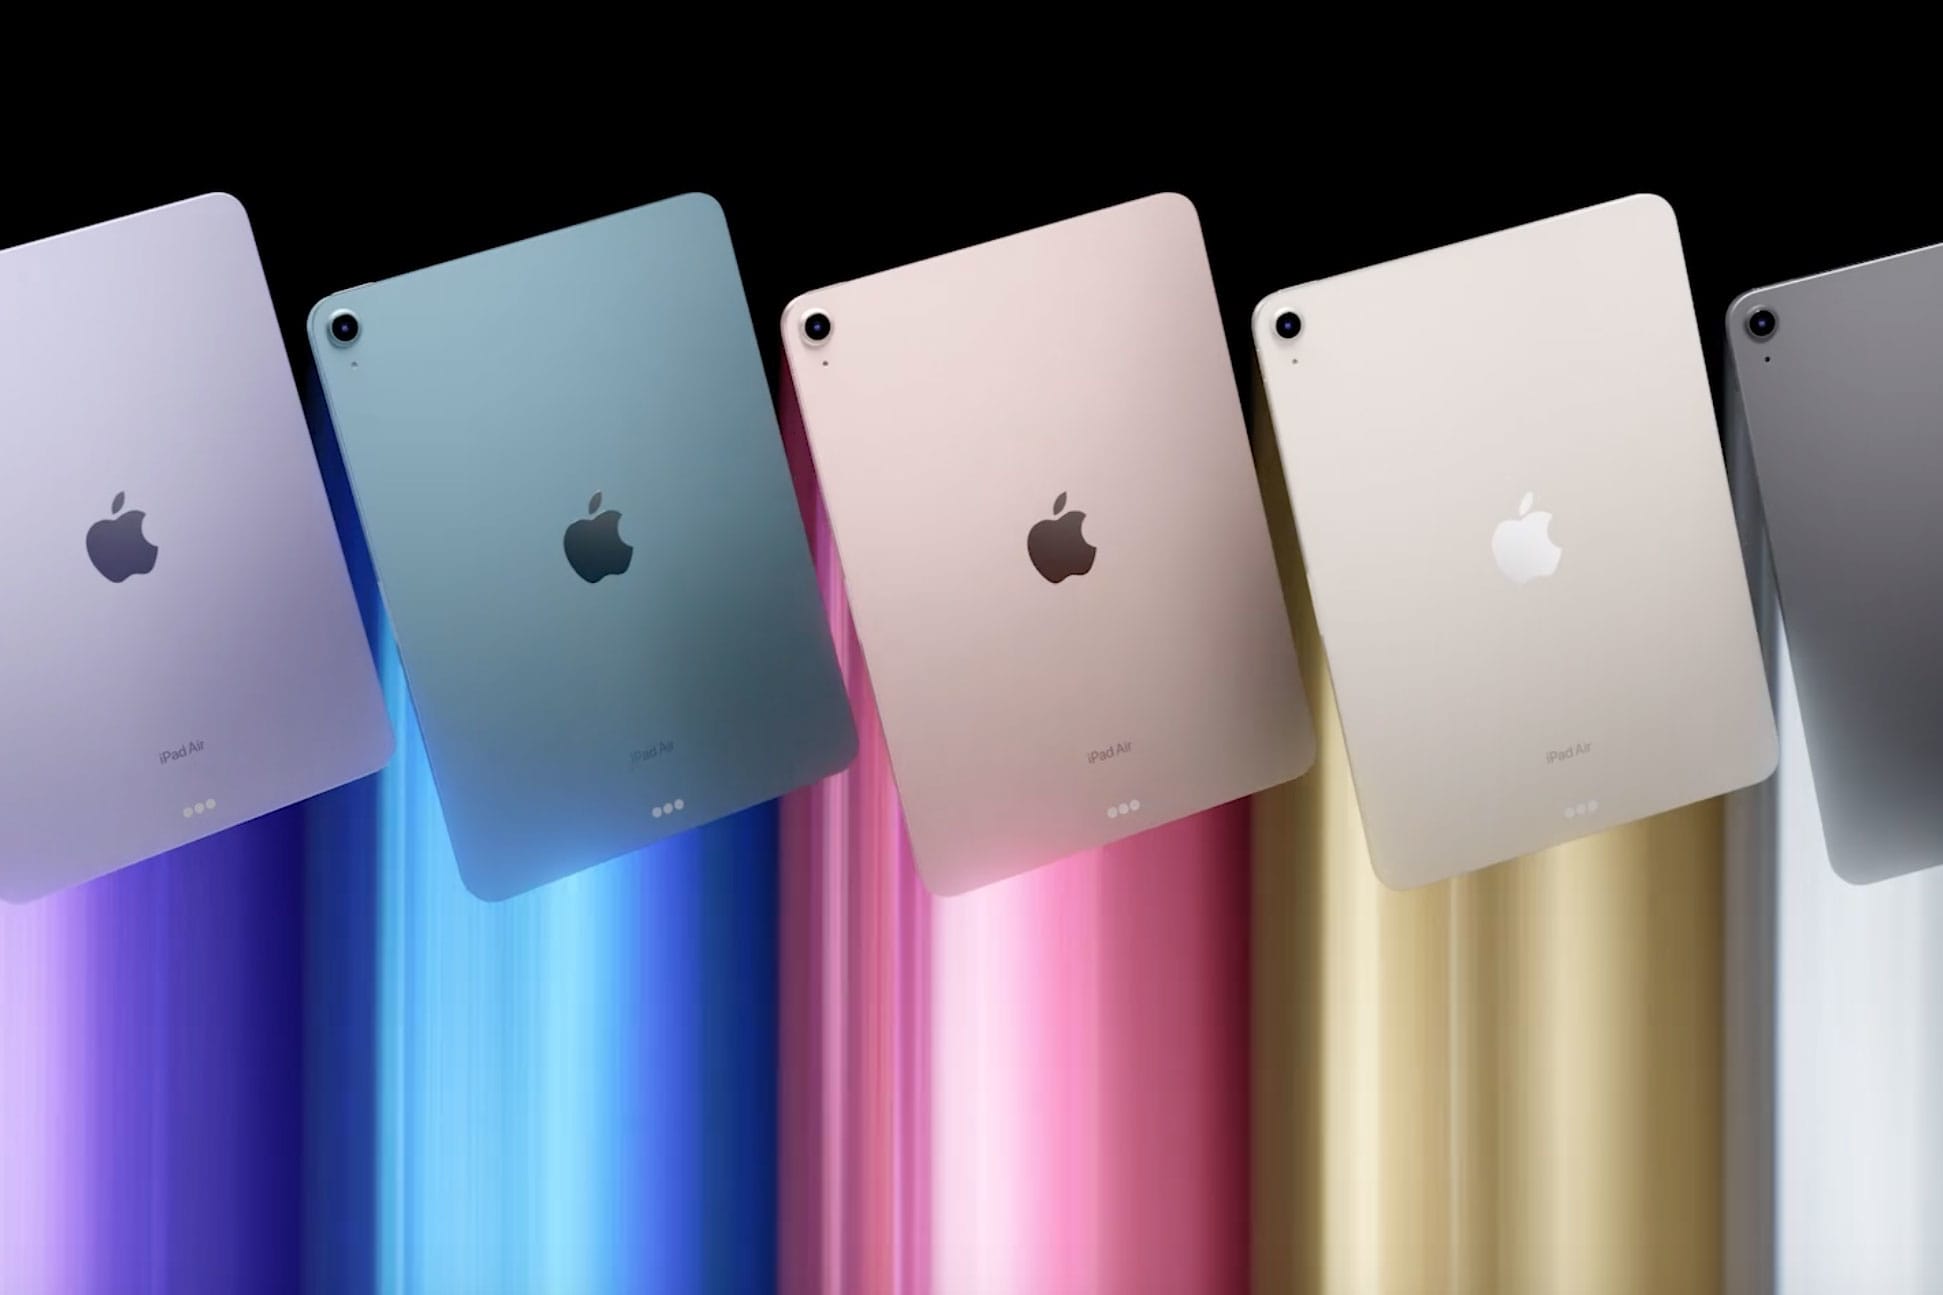 Apple's redesigned iPad Air sports 10.9-inch display, A14 Bionic chip